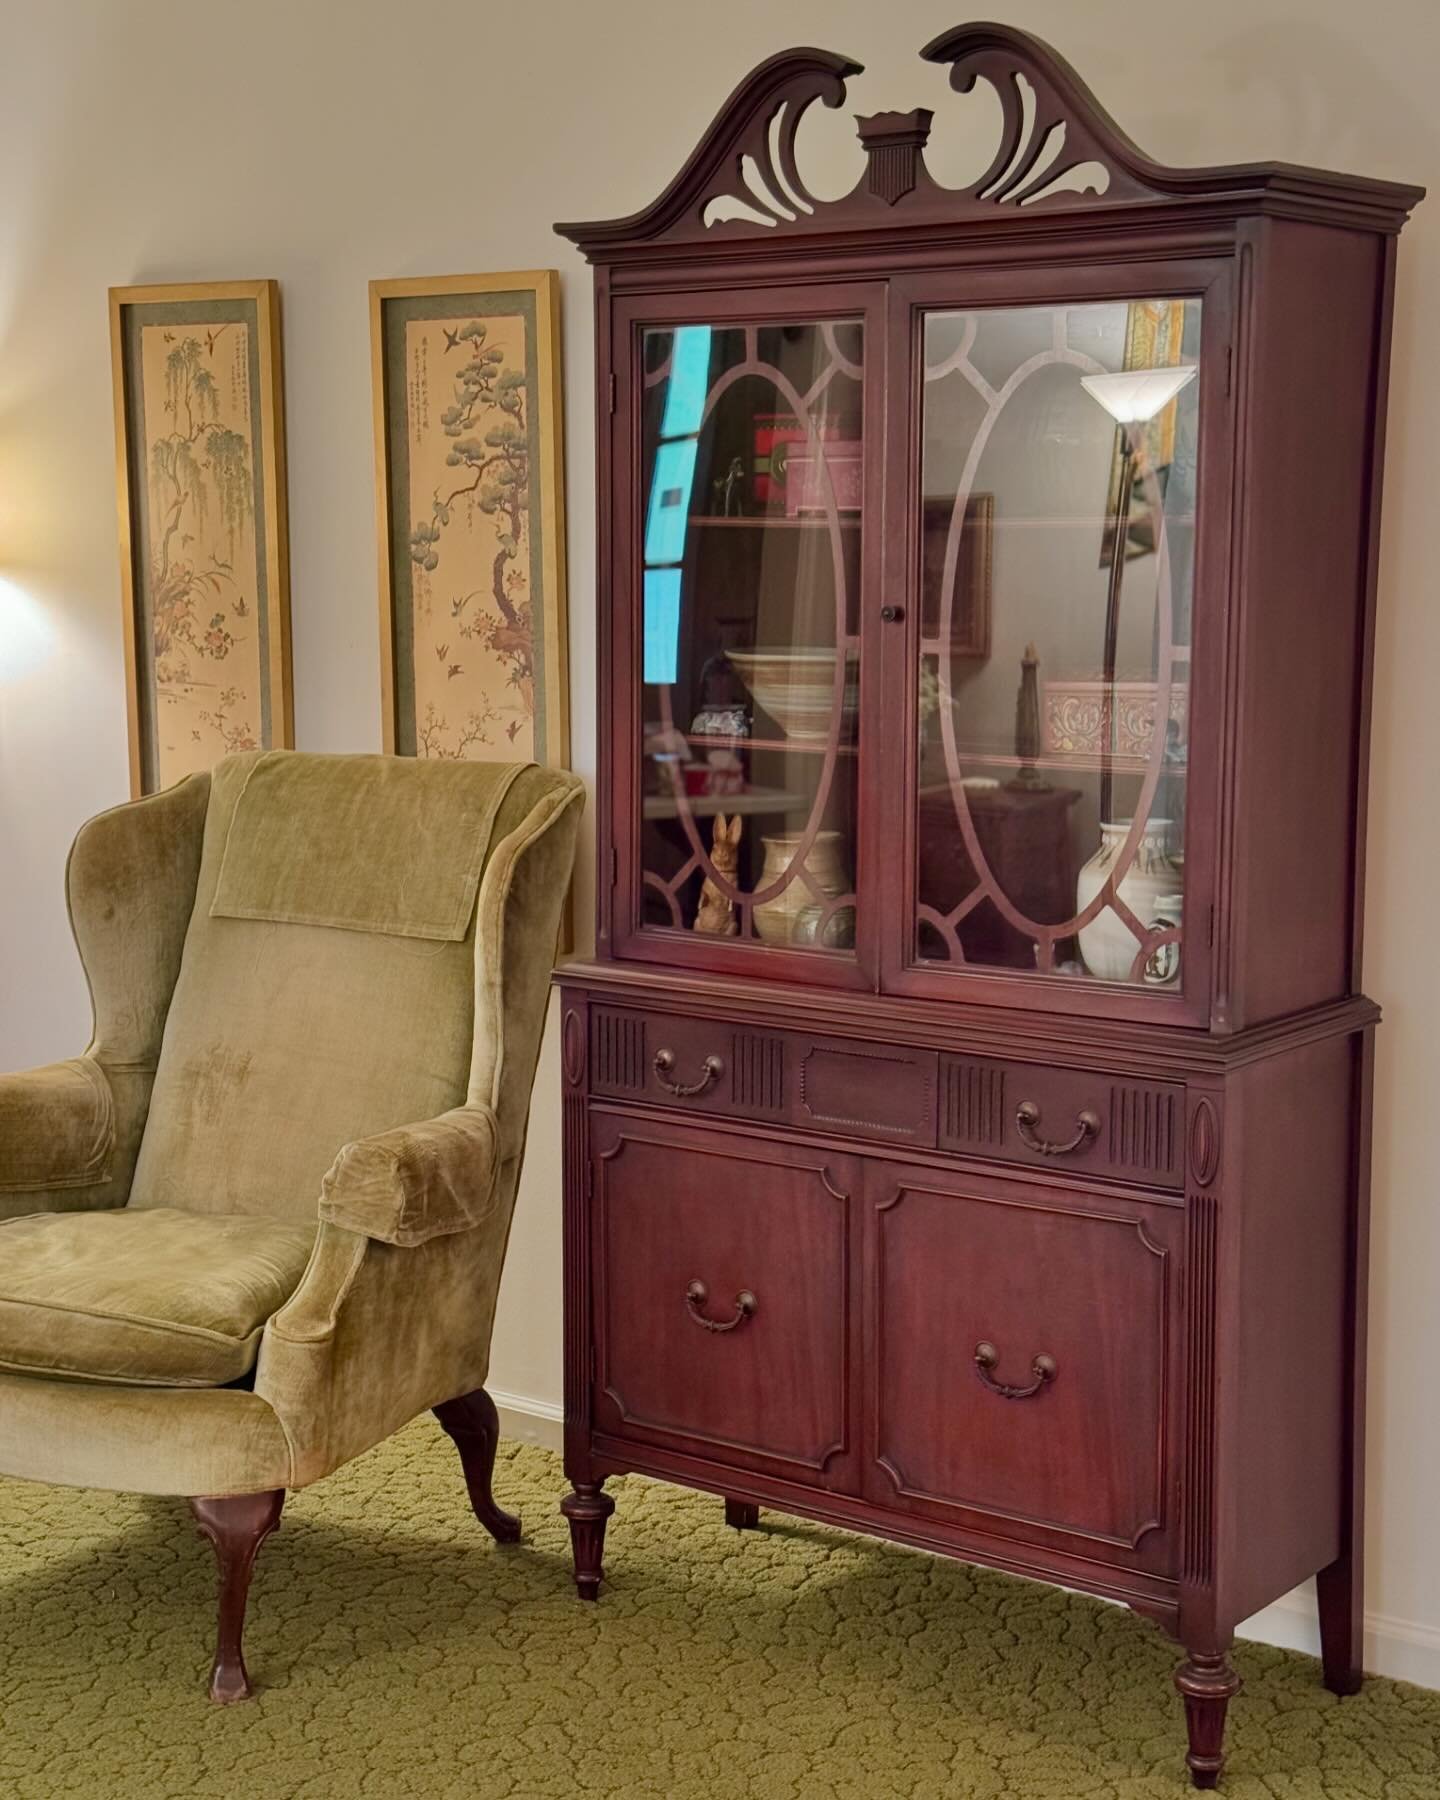 We can&rsquo;t wait to see you all tomorrow (5/3) at our Isle Of Hope Estate Sale! The address is 107 Hopecrest Avenue and we will be there from 10:00am - 12:00pm! #estate #estatesale #estatesalefinds #estateliquidation #estatesales #furniture #forsa